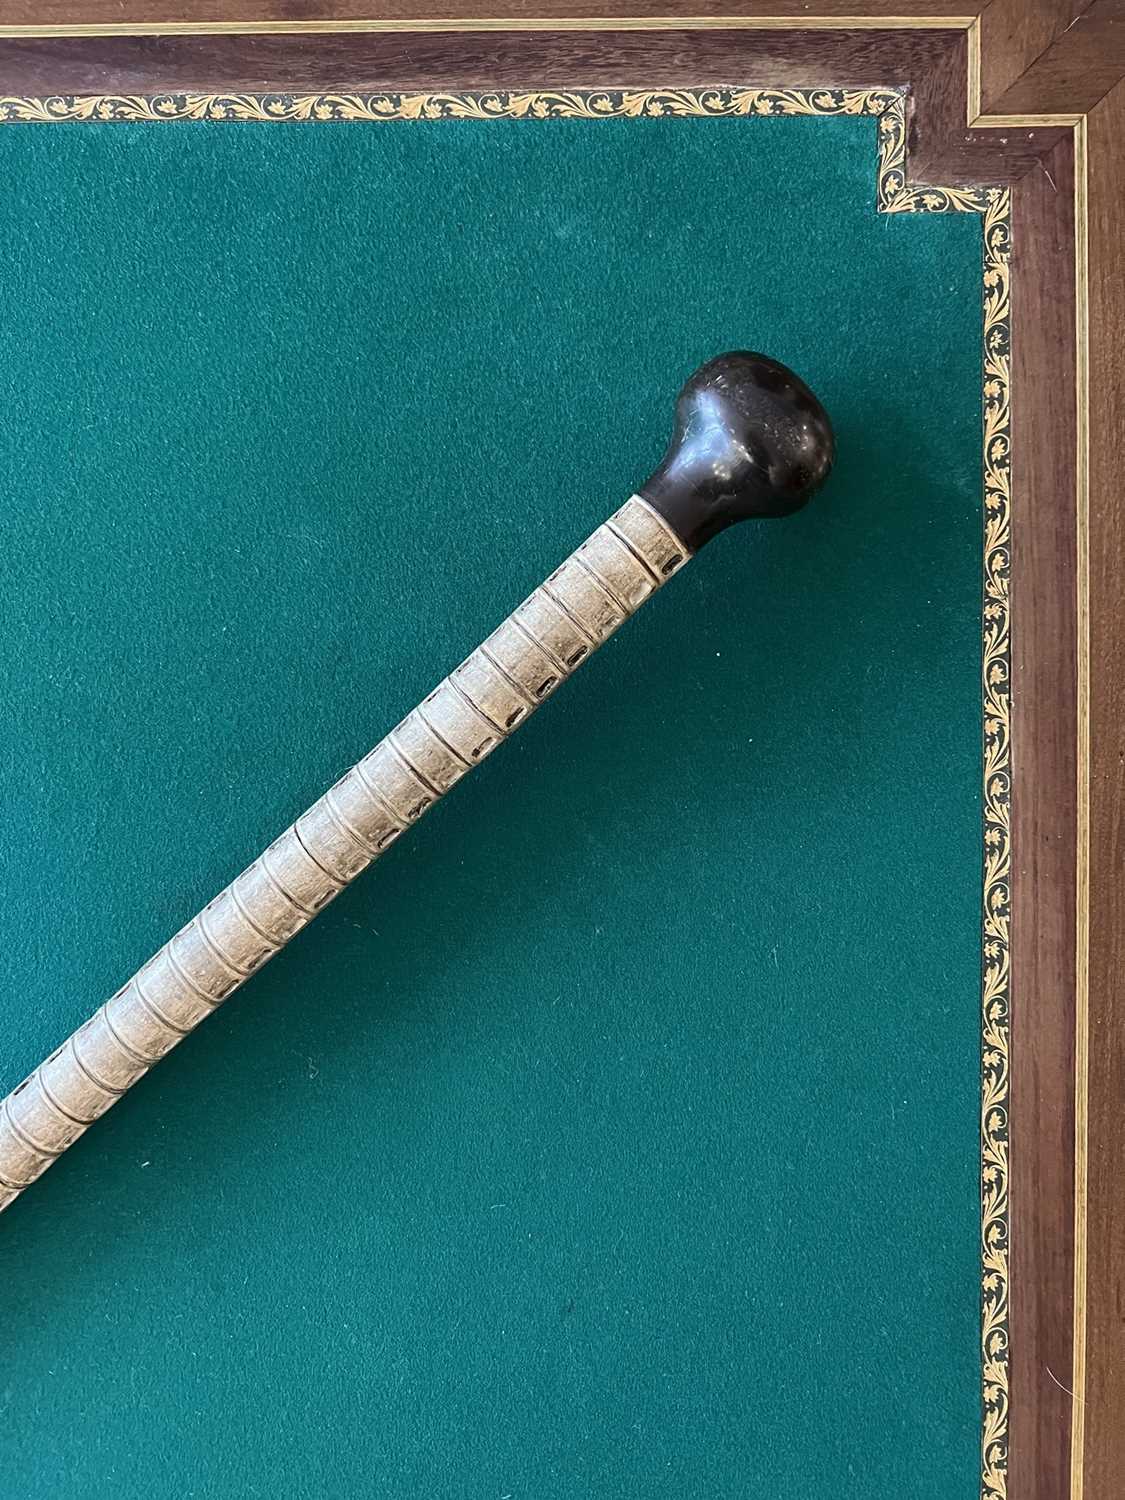 A LATE 19TH / EARLY 20TH CENTURY WALKING CANE FORMED FROM SHARK VERTEBRAE